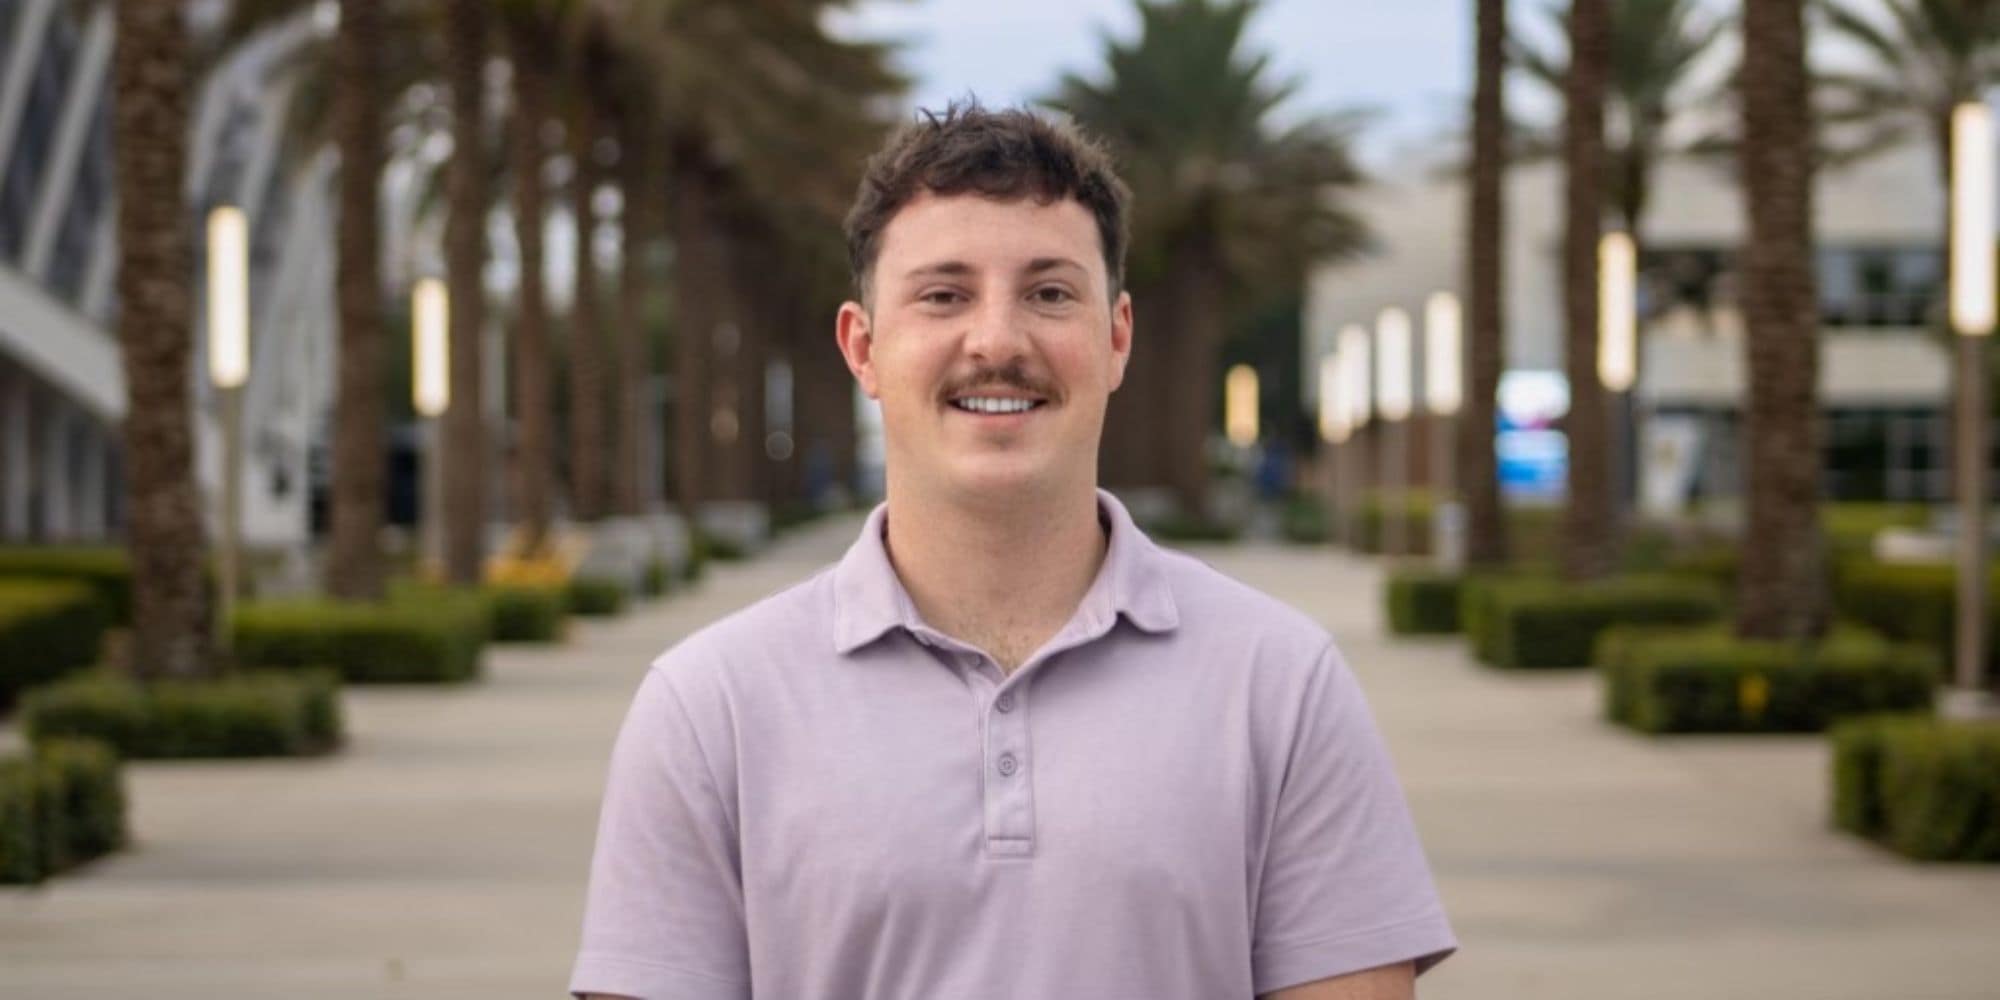 Cameron Archibald, shown here on the Daytona Beach Campus, has accepted a full-time job with Phantom Works at The Boeing Co. (Photo: Cameron Archibald)